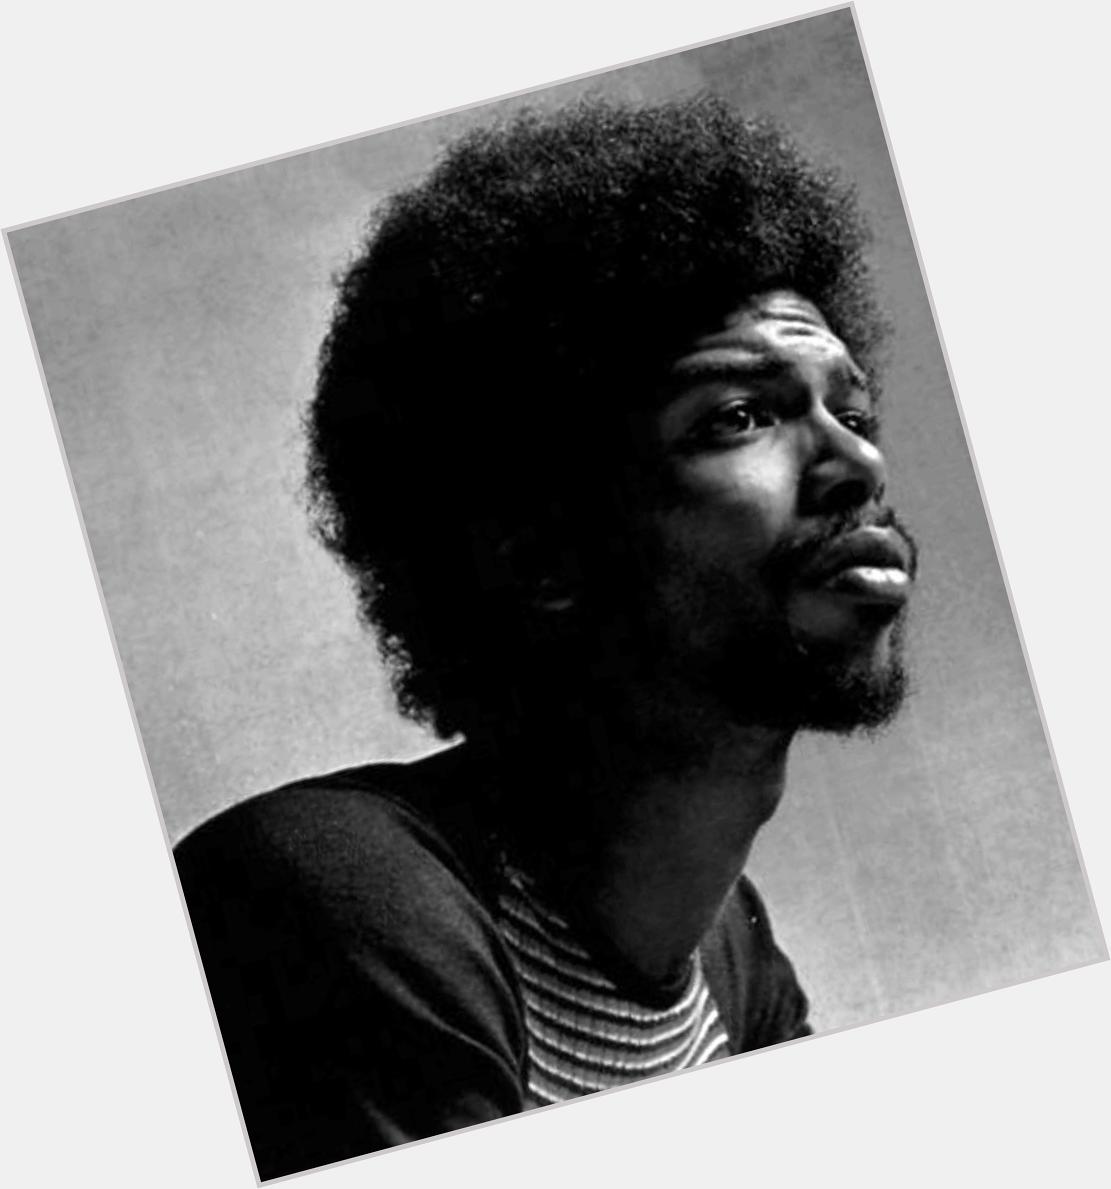 Happy Birthday to Gil Scott-Heron, who would have turned 66 today! 